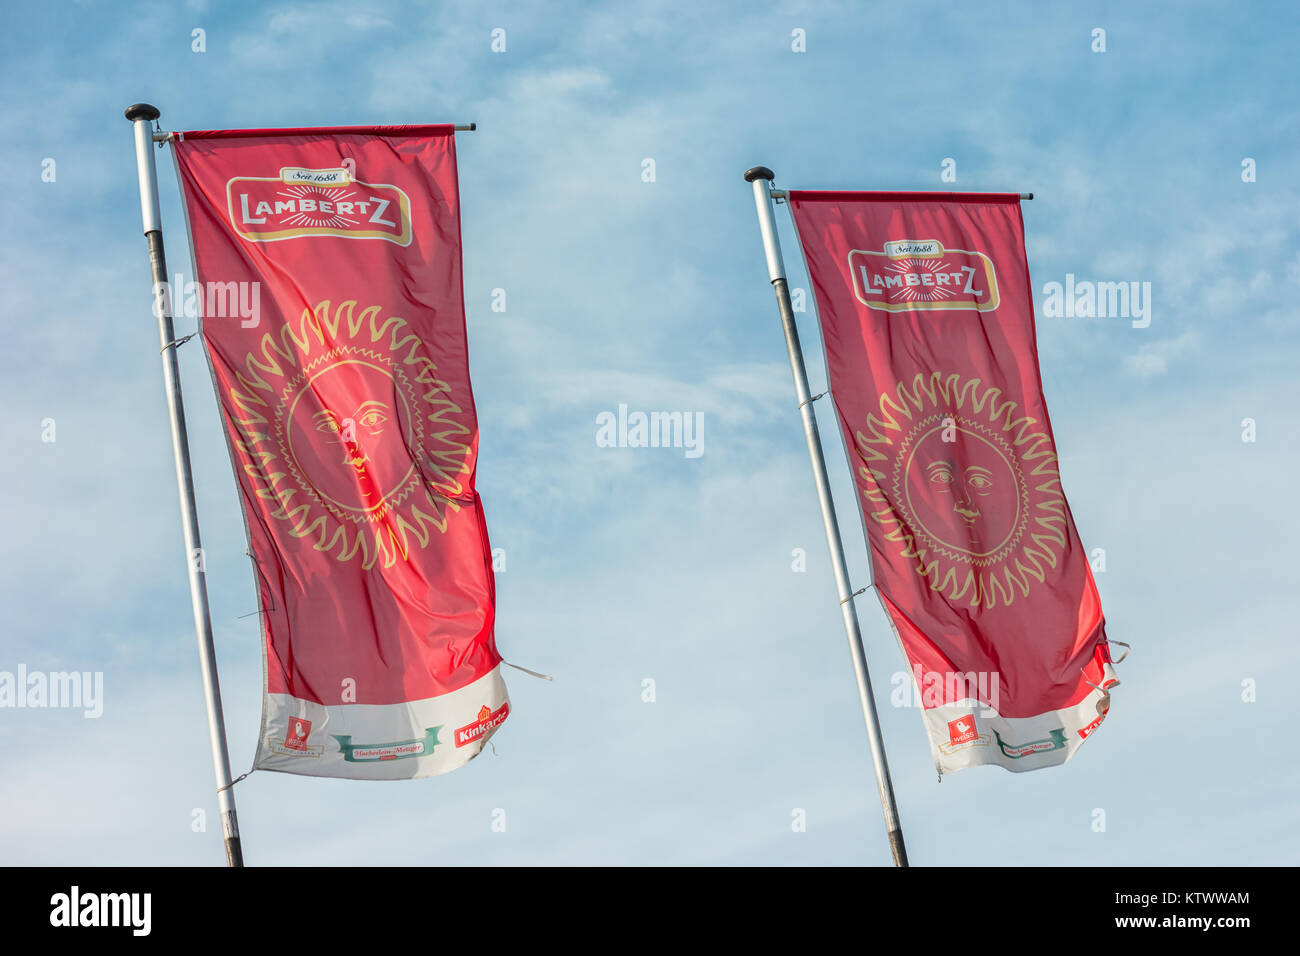 Lambertz factory flags. The Lambertz Group is a Aachener Printen- and chocolate factory founded by Henry Lambertz 1688 and a manufacturer Christmas Stock Photo